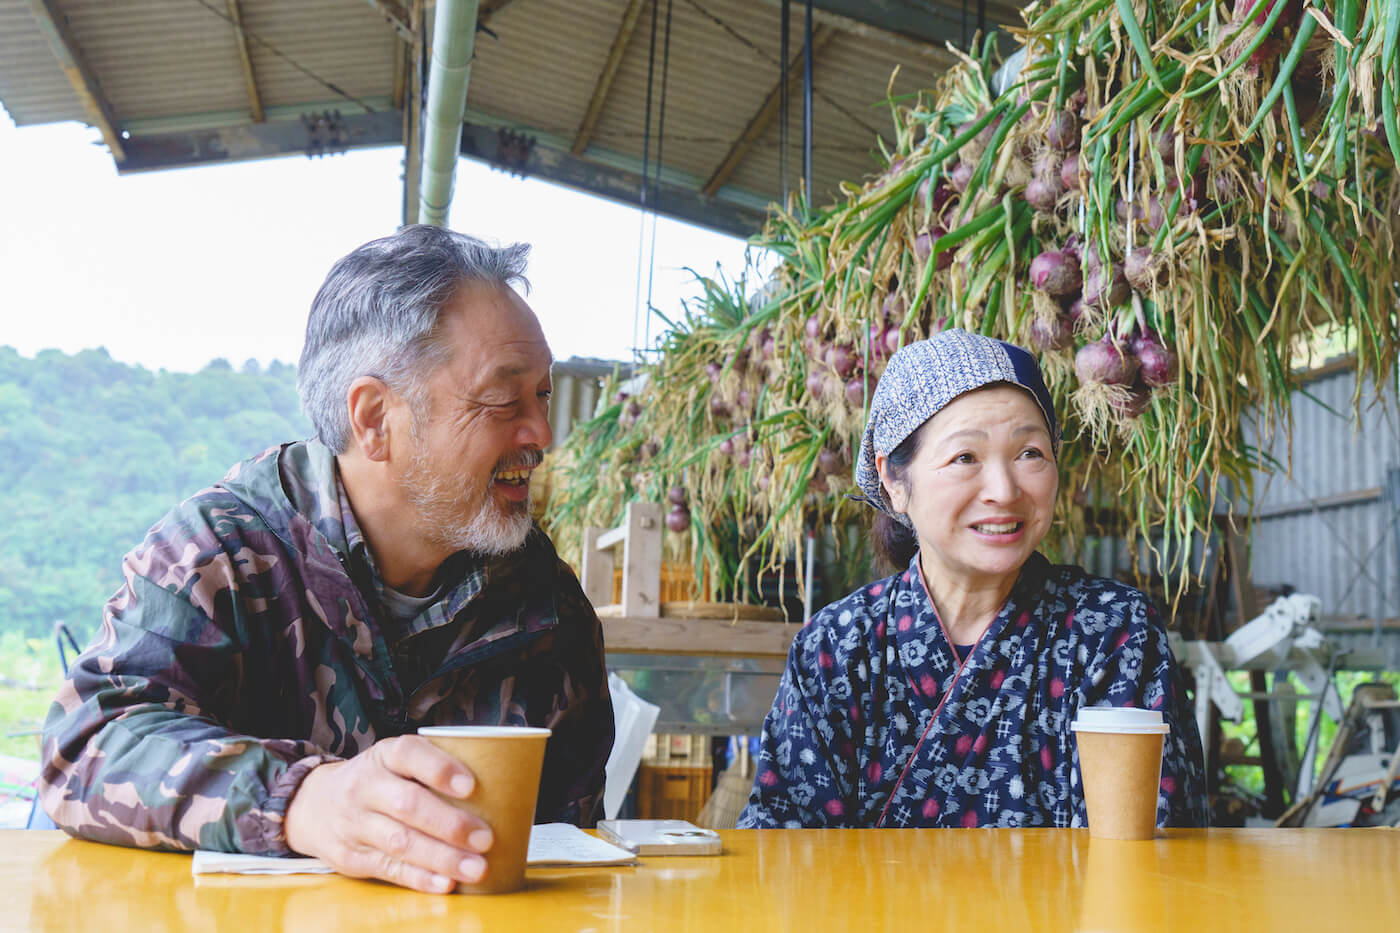 Kazuko Maeda & Yukio Ogushi - From City to Soil: The Couple that Turned a Mountain into a Gathering Spot / 前田和子&大串幸男 - 閉じた土地を生かし「農・食・人」が集う森へ